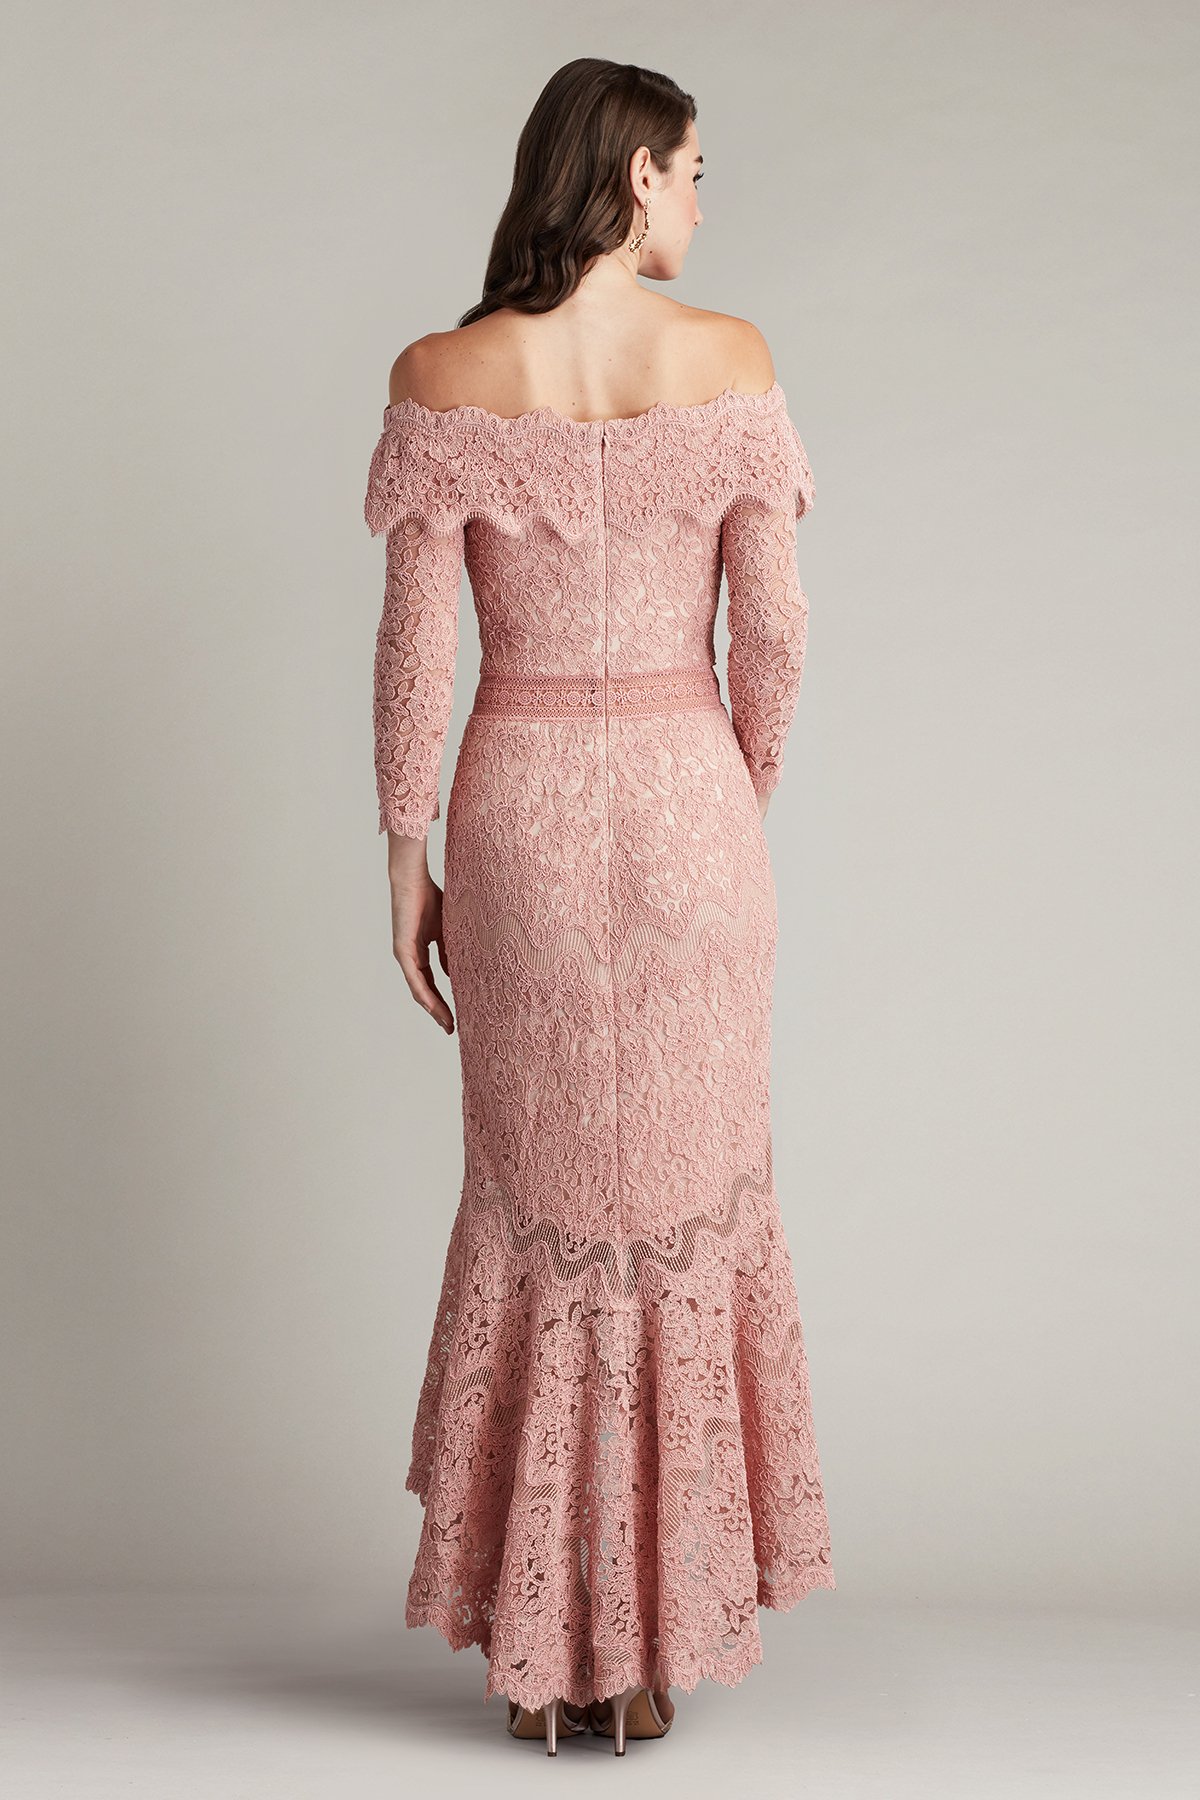 Morrow Embroidered Tulle High-Low Dress